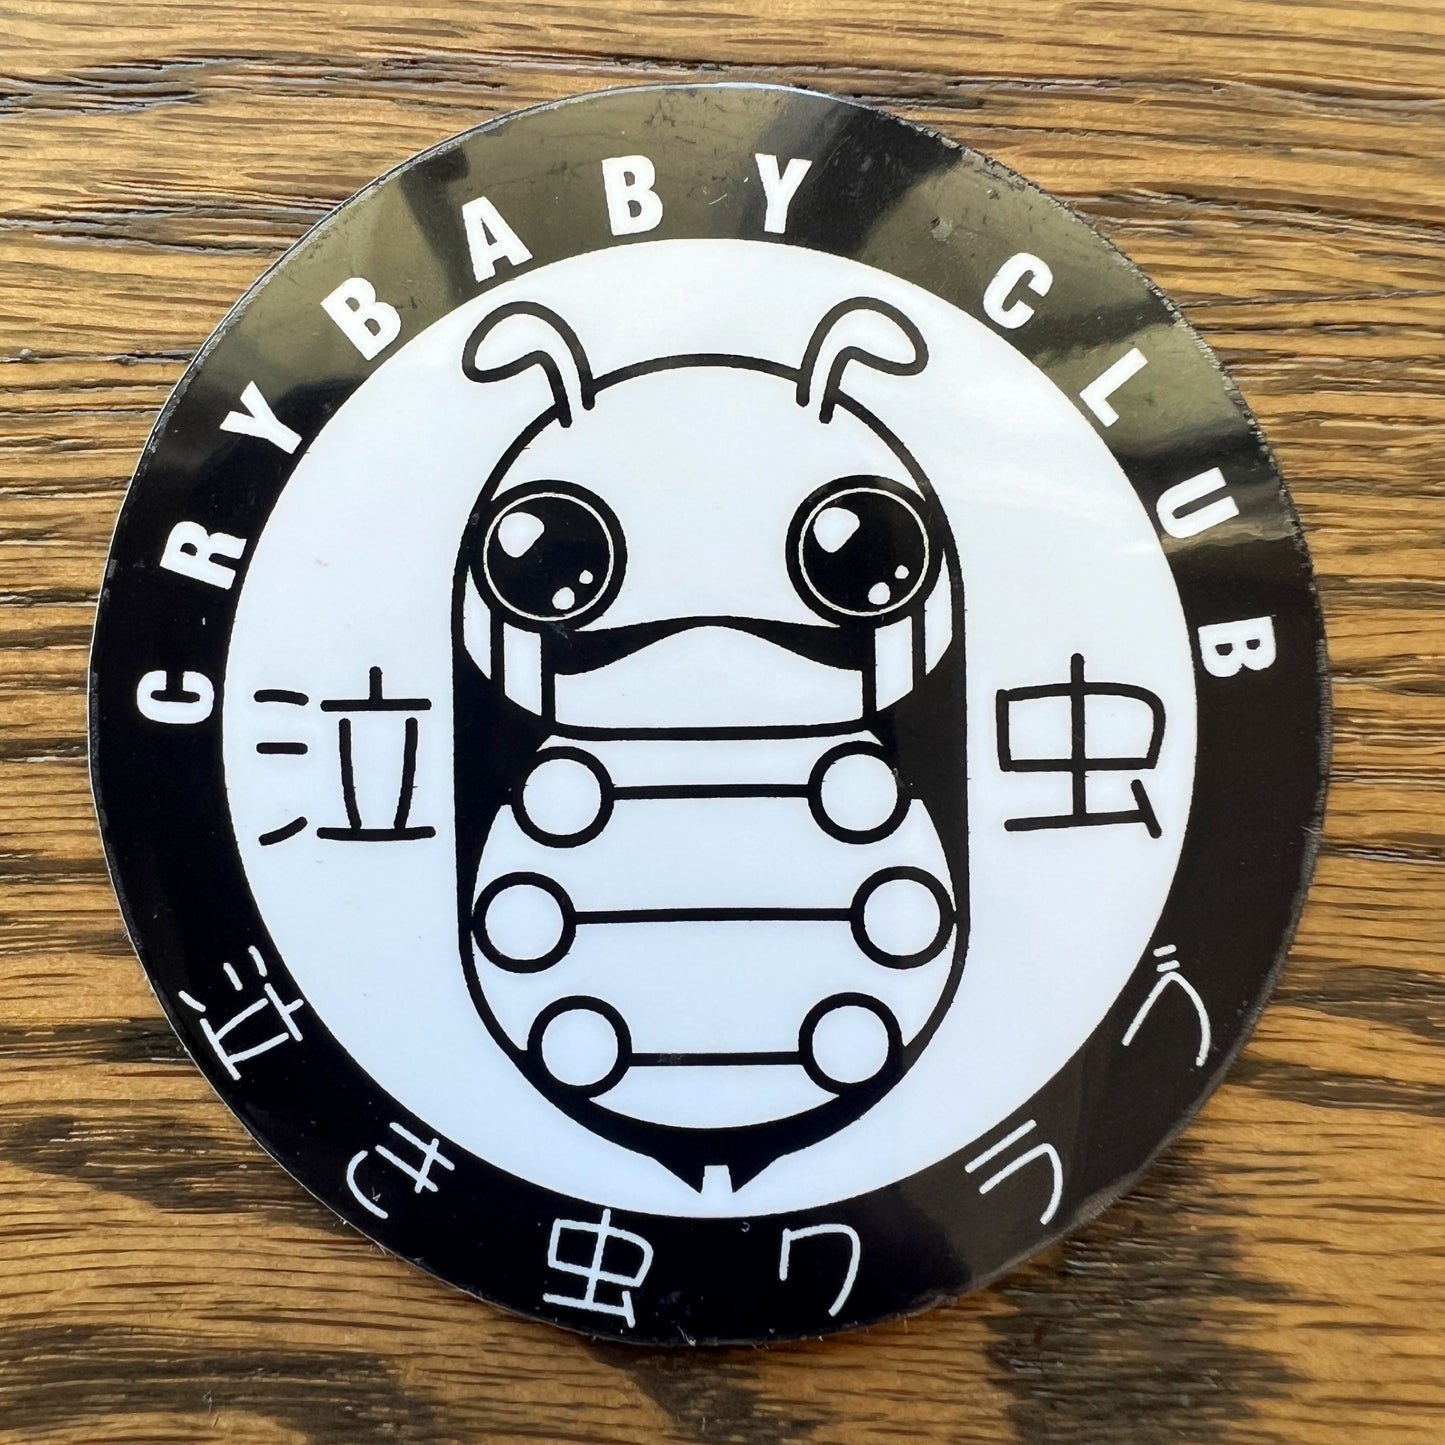 Crybaby Club Pilliam Pill Bug Roly Poly Stickers - Die Cut